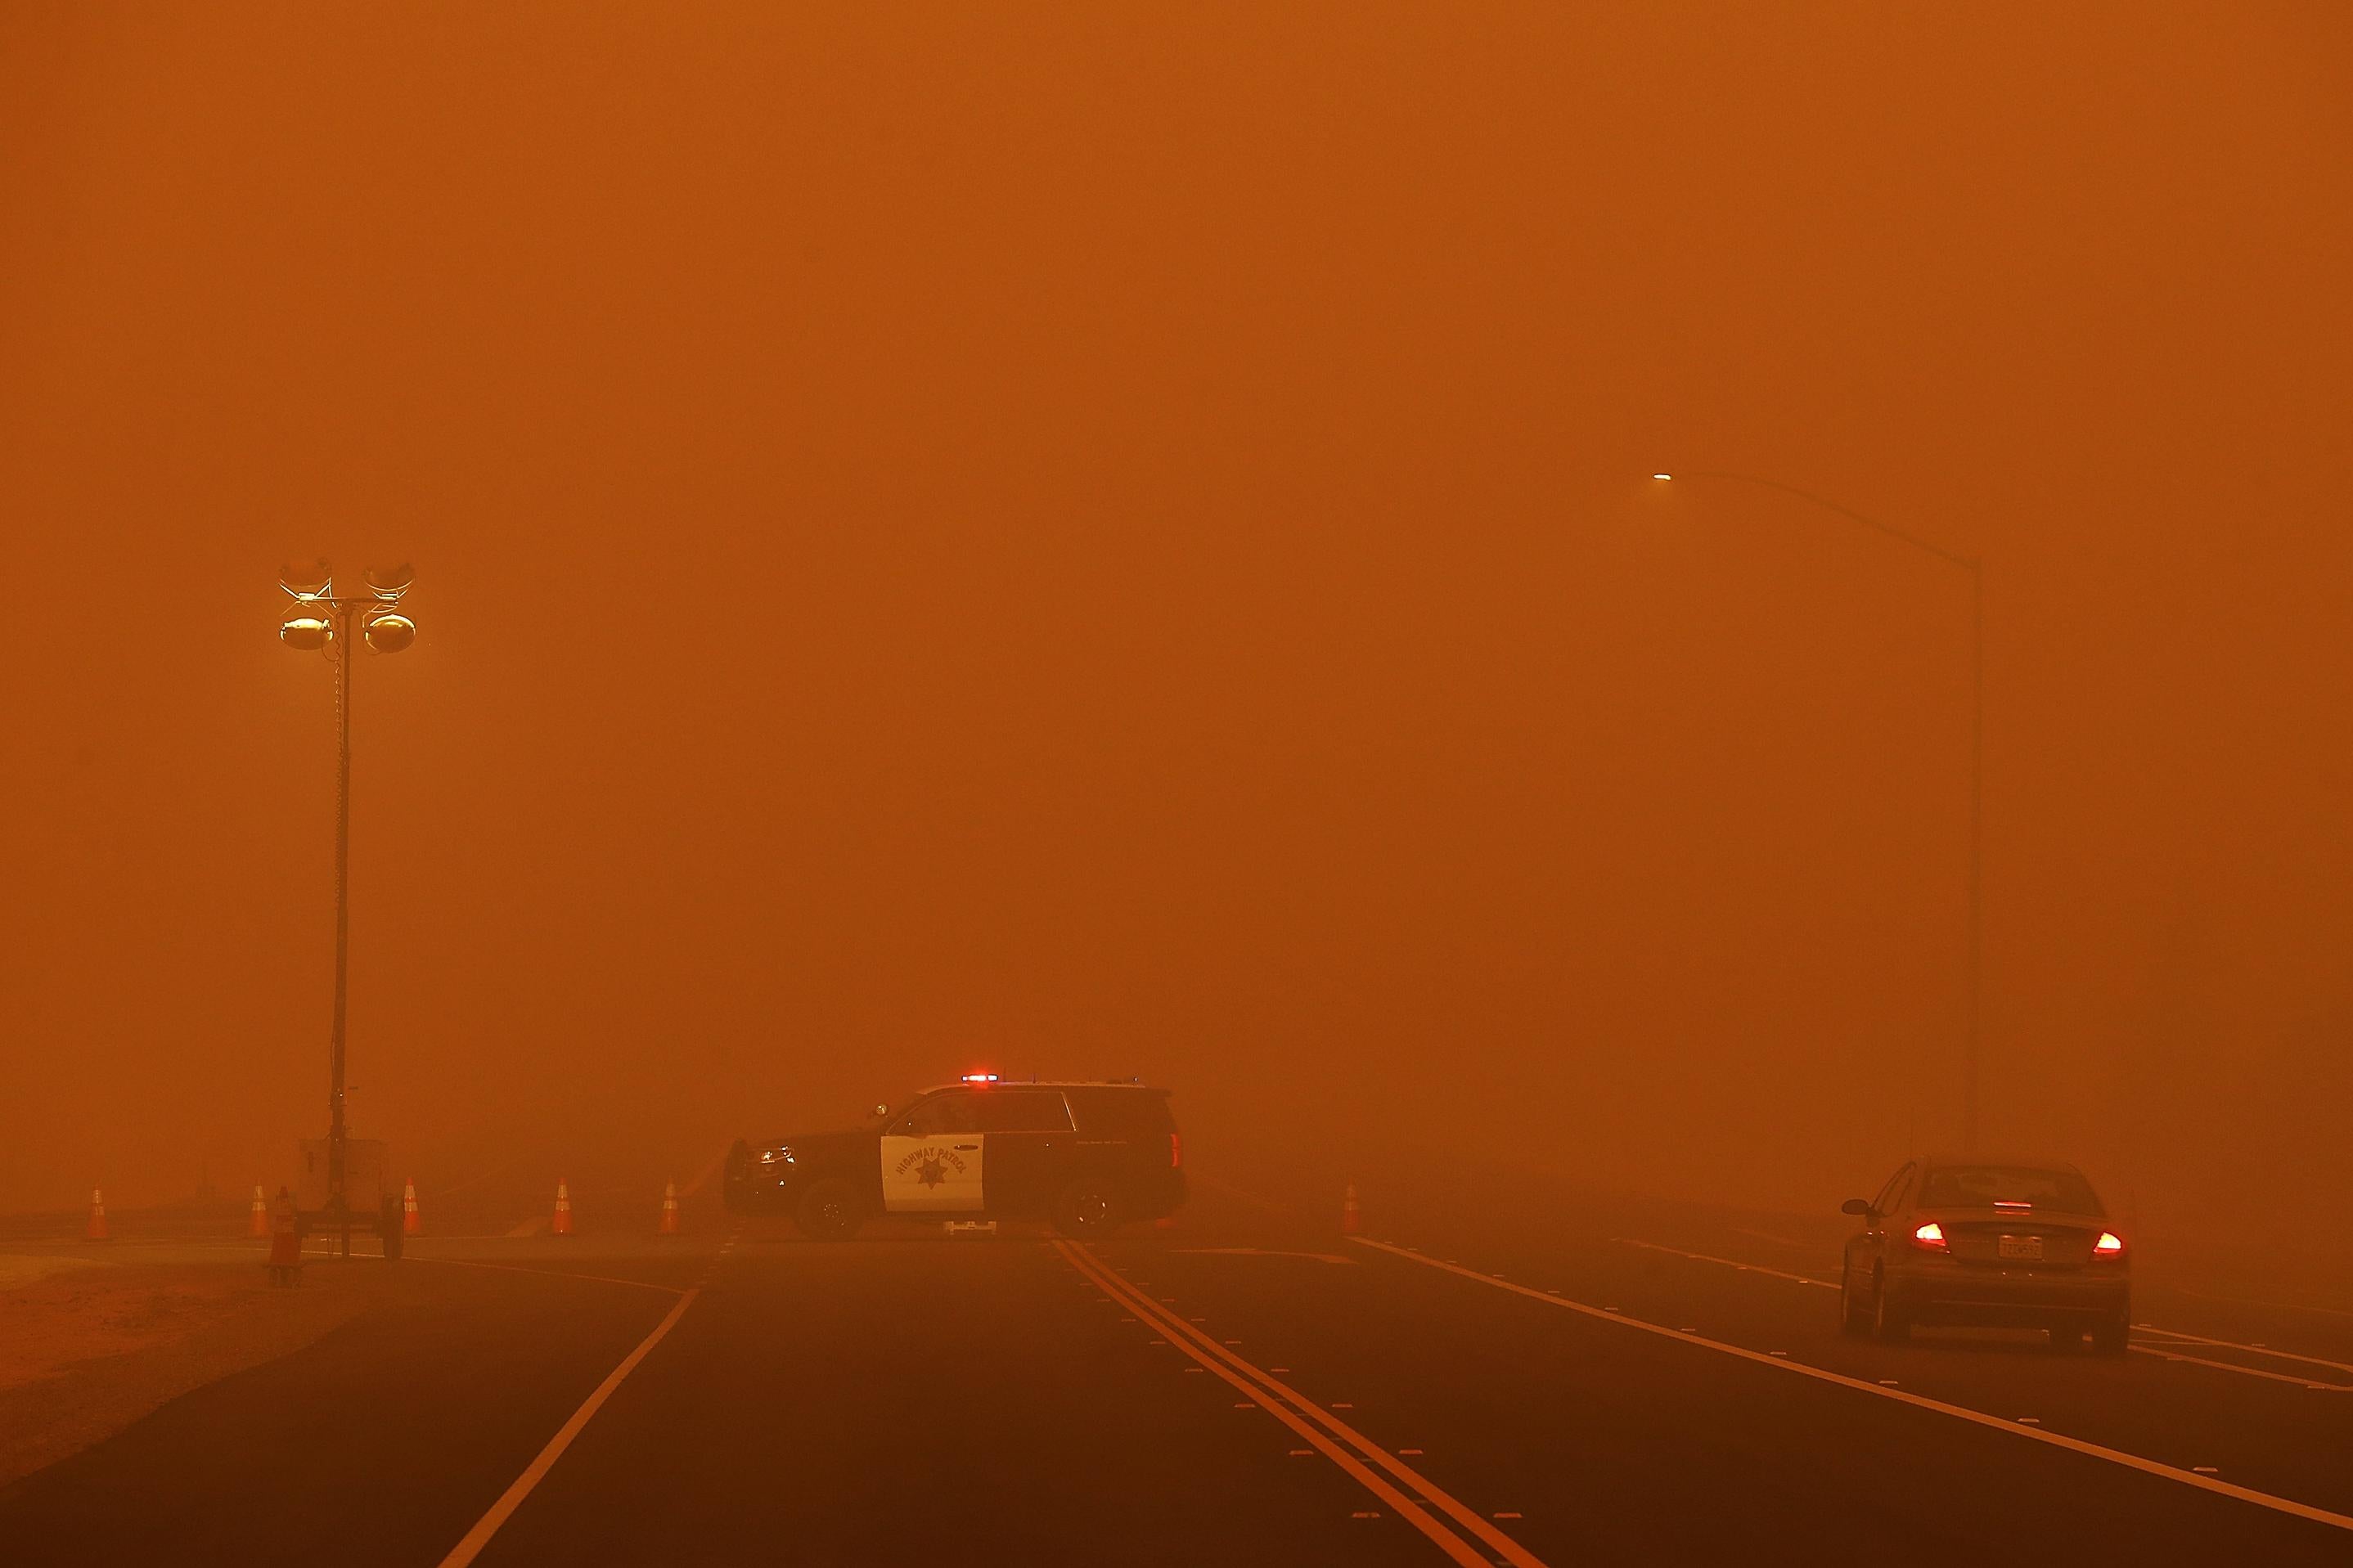 A patrol vehicle on an empty road engulfed in a smoky haze.